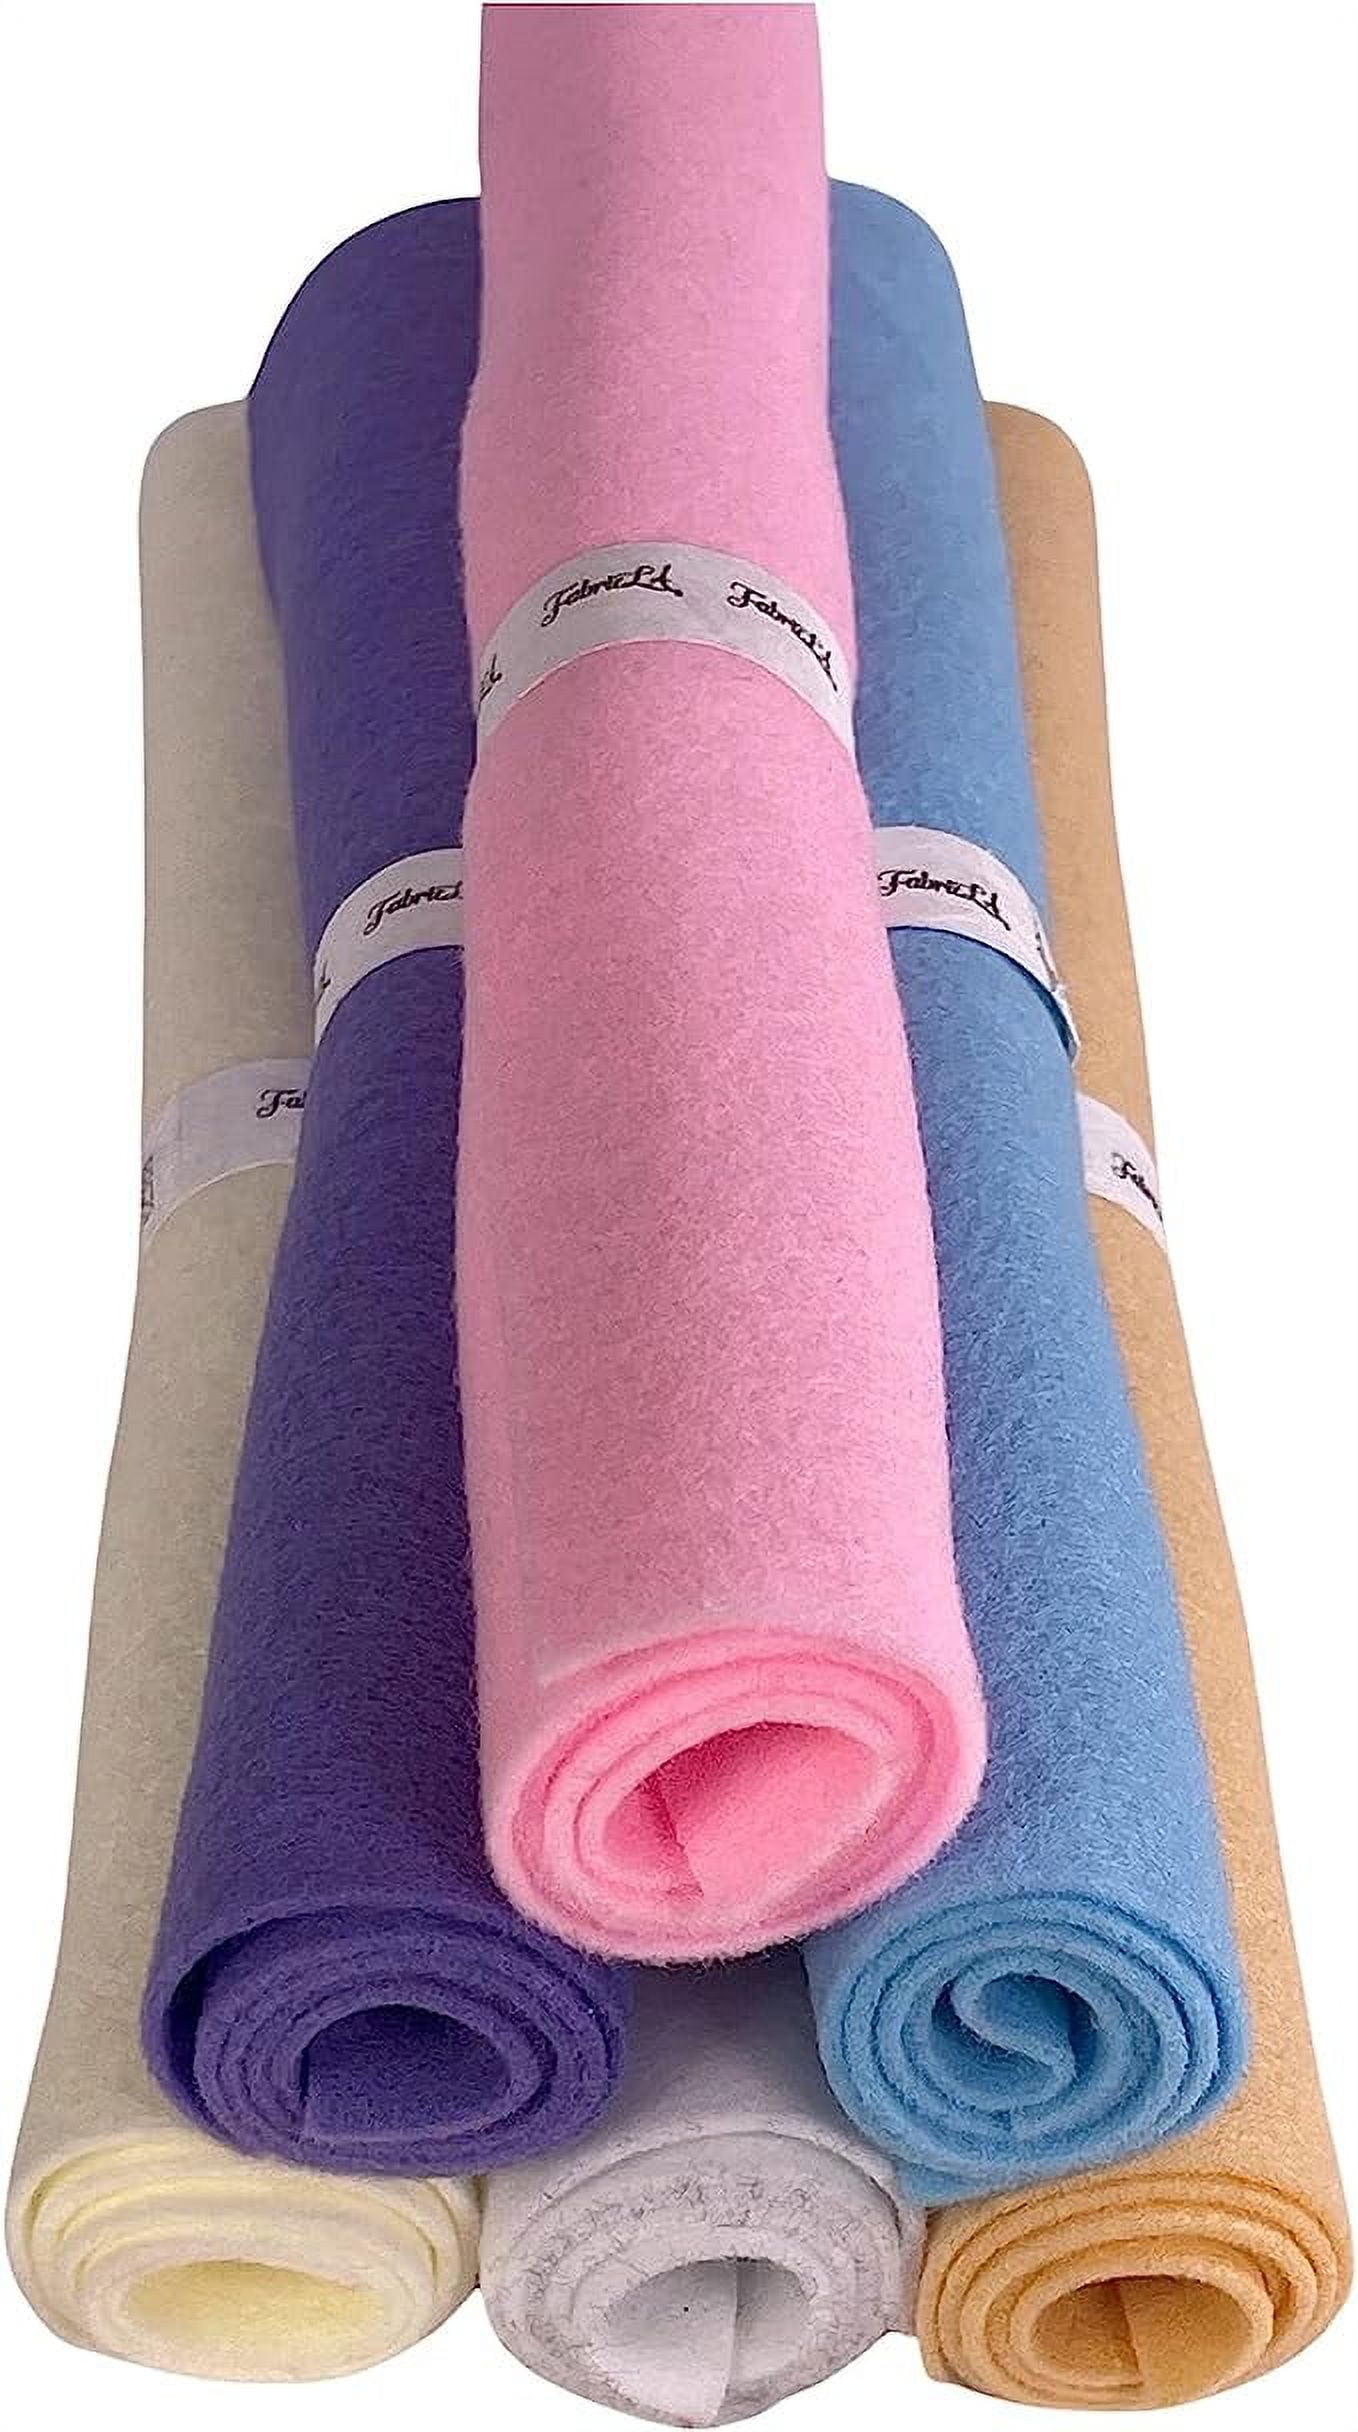 FabricLA Craft Felt Rolls 6 Pieces - 12 X 18 Inches Assorted Color  Non-Woven Soft Felt Material - Acrylic Felt Roll for DIY Craftwork, Sewing  and Patchwork - Autumn Colors